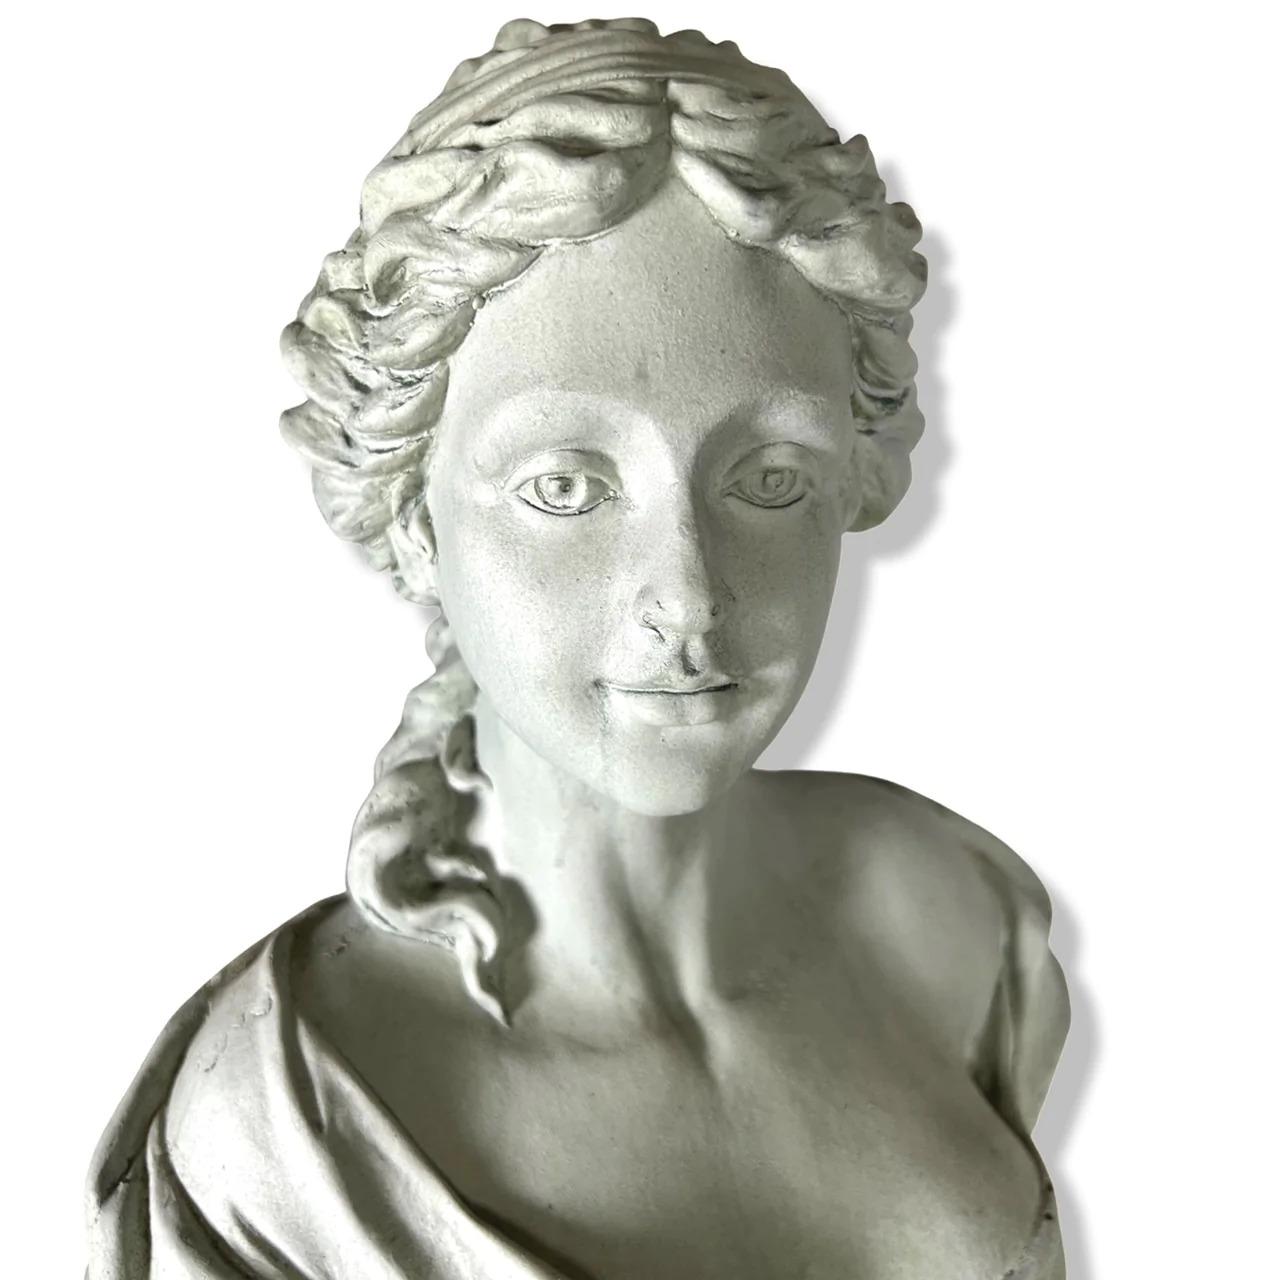 This elegant Antoinette style bust is made from faux stone, and is moderately heavy, yet functional enough to move around and place with ease. It is brilliantly cast, and would be well suited to a garden table display or interior formal lounge. A